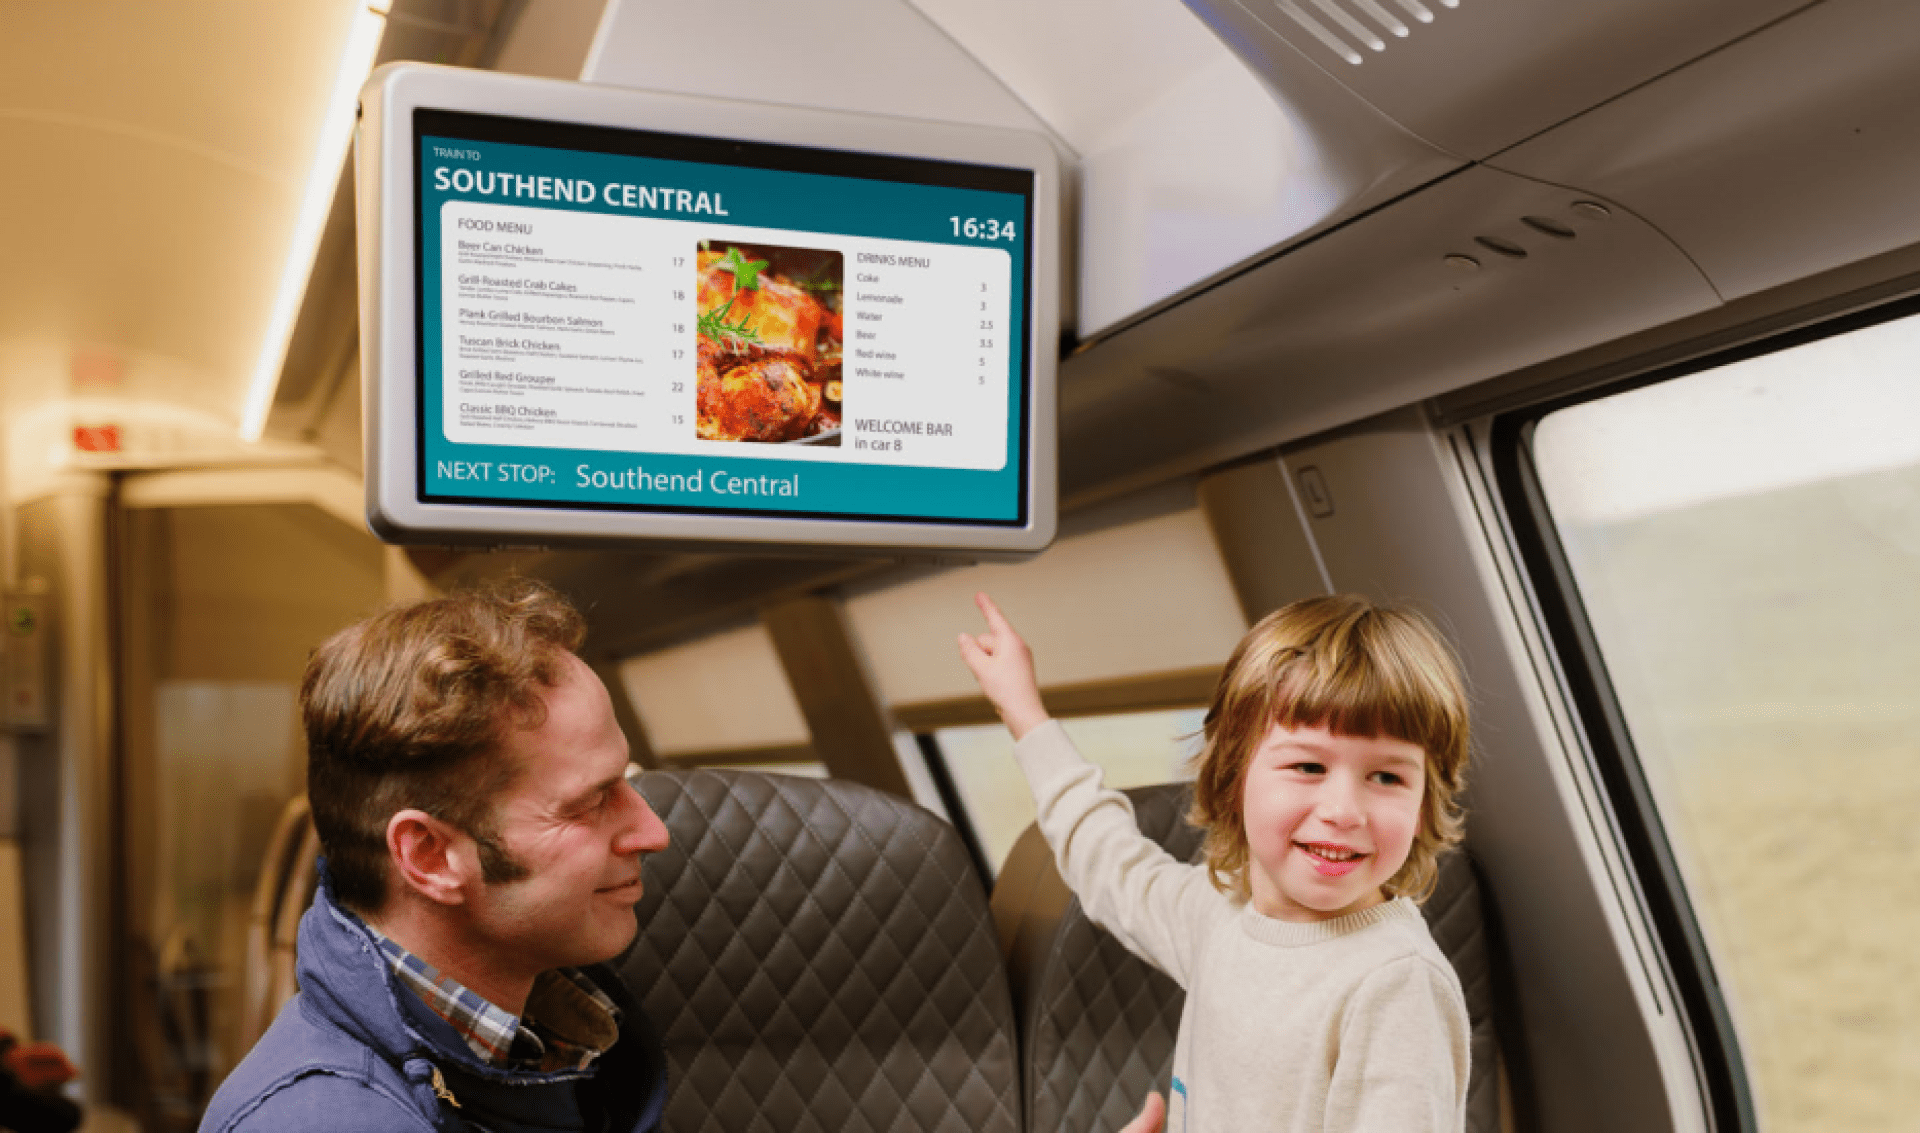 Boy pointing at TFT display in train, visual information